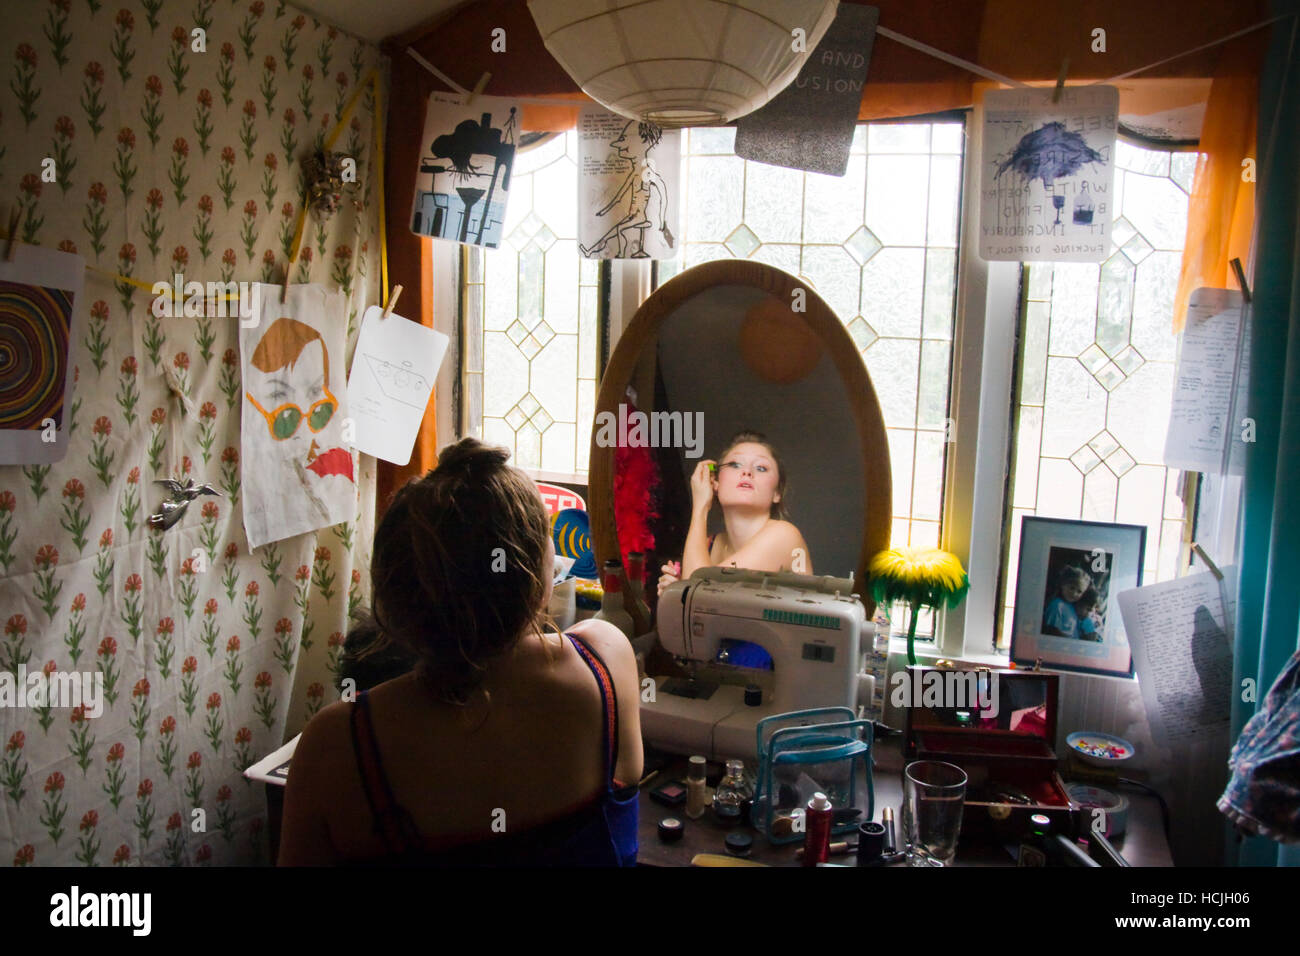 A young woman puts on makeup in her room at home in Seattle, Washington. Stock Photo